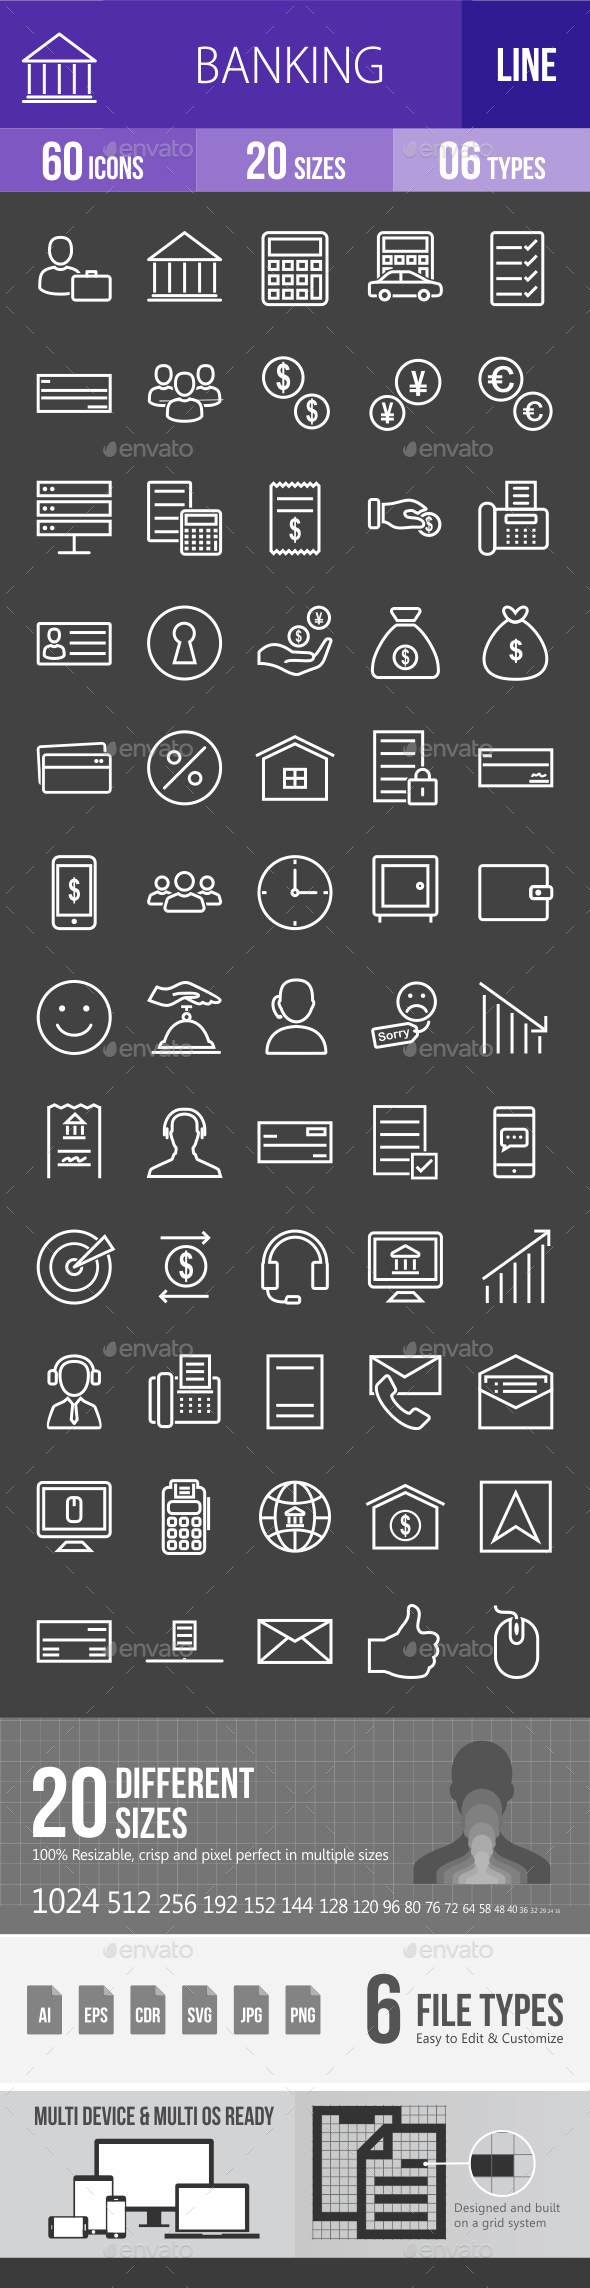 Banking Line Inverted Icons